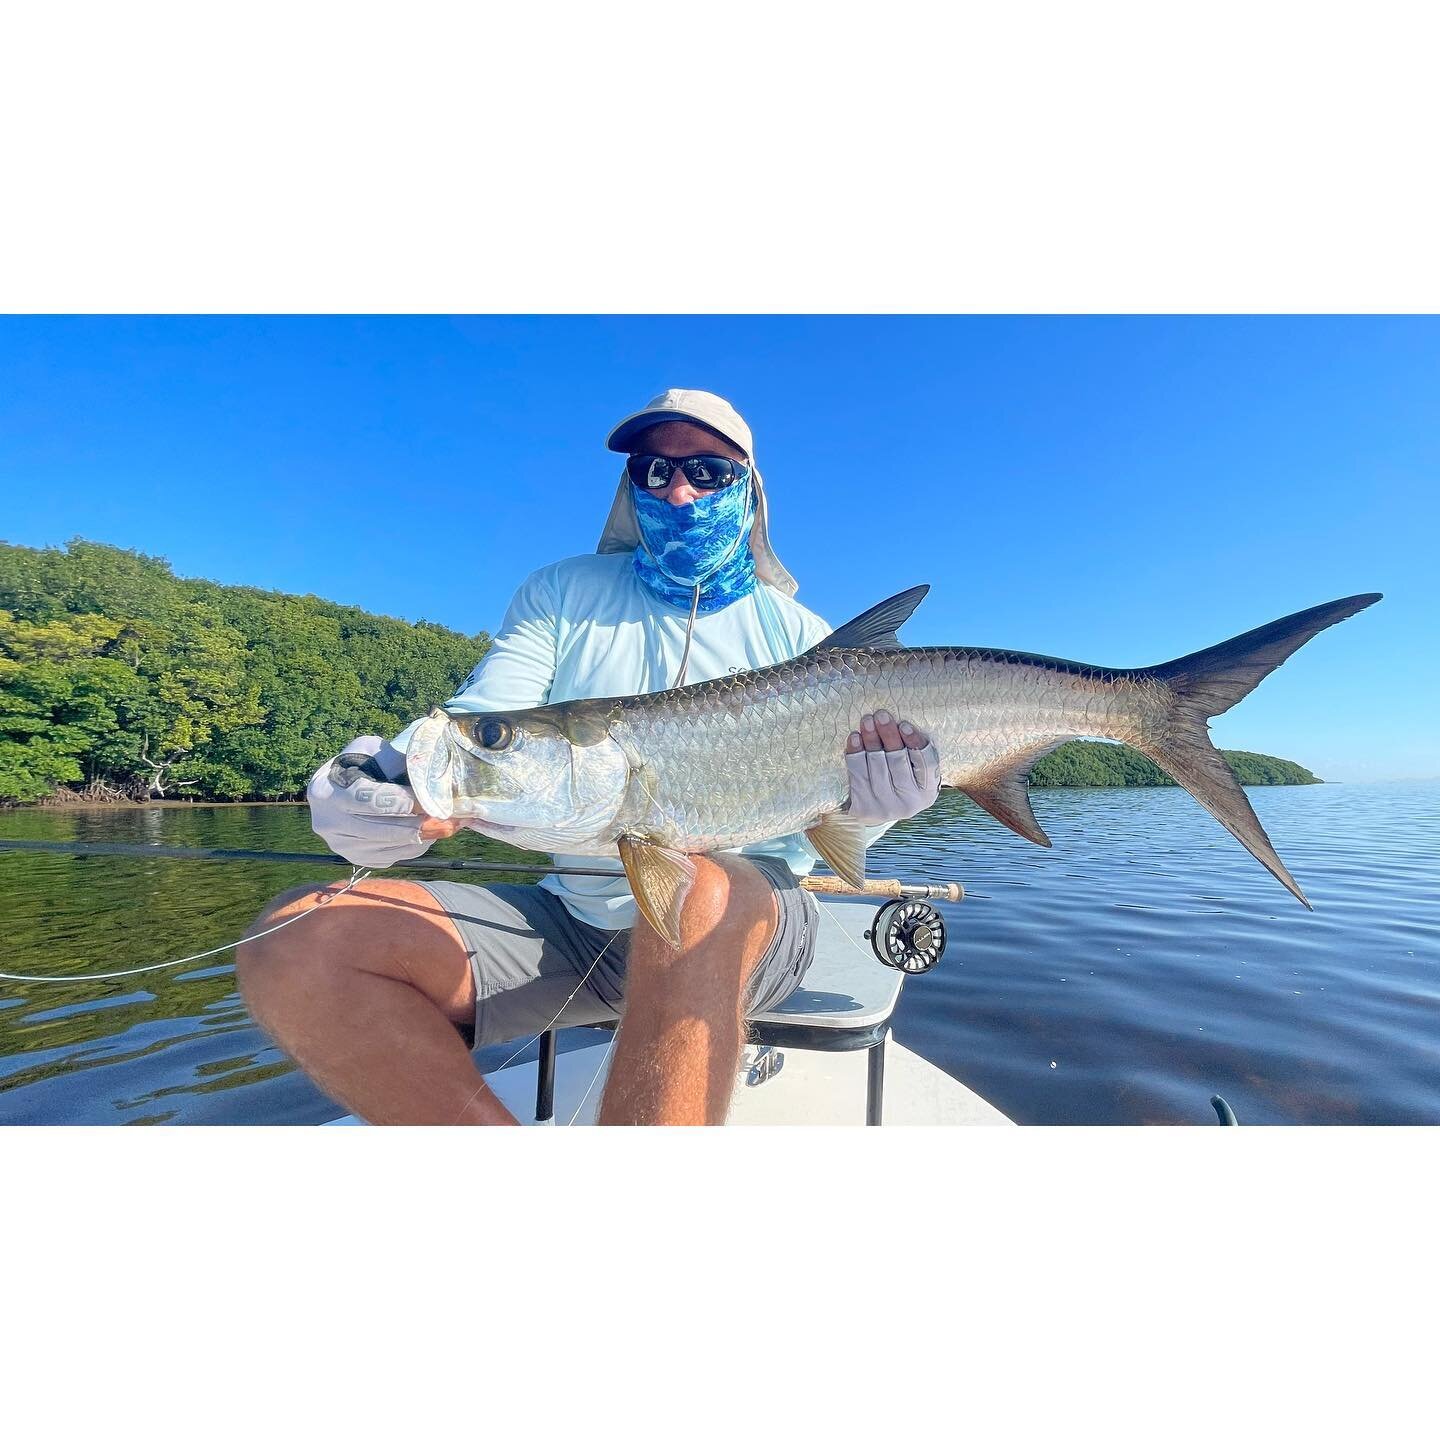 Stu with a healthy juvenile #tarpononfly to dial in for the mommas and poppas on our next trip 🤙🏽🤙🏽. A lot of effort and attention to details go into presenting a fly, feeding, fighting and landing any sight fished species. Some require more than